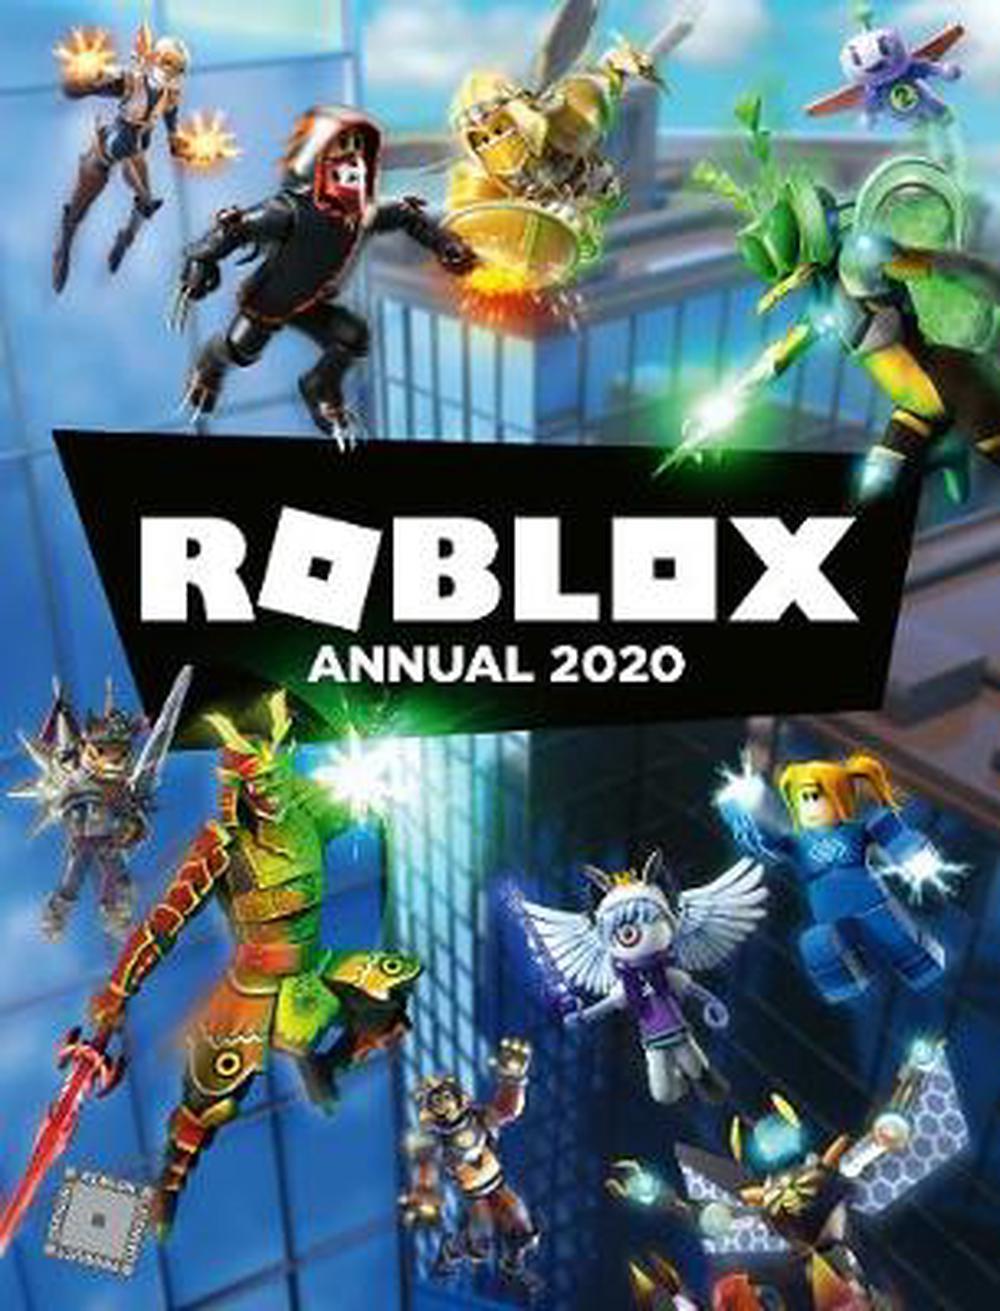 Roblox Annual 2020 By Roblox Hardcover 9781405294454 Buy Online At The Nile - roblox books nz